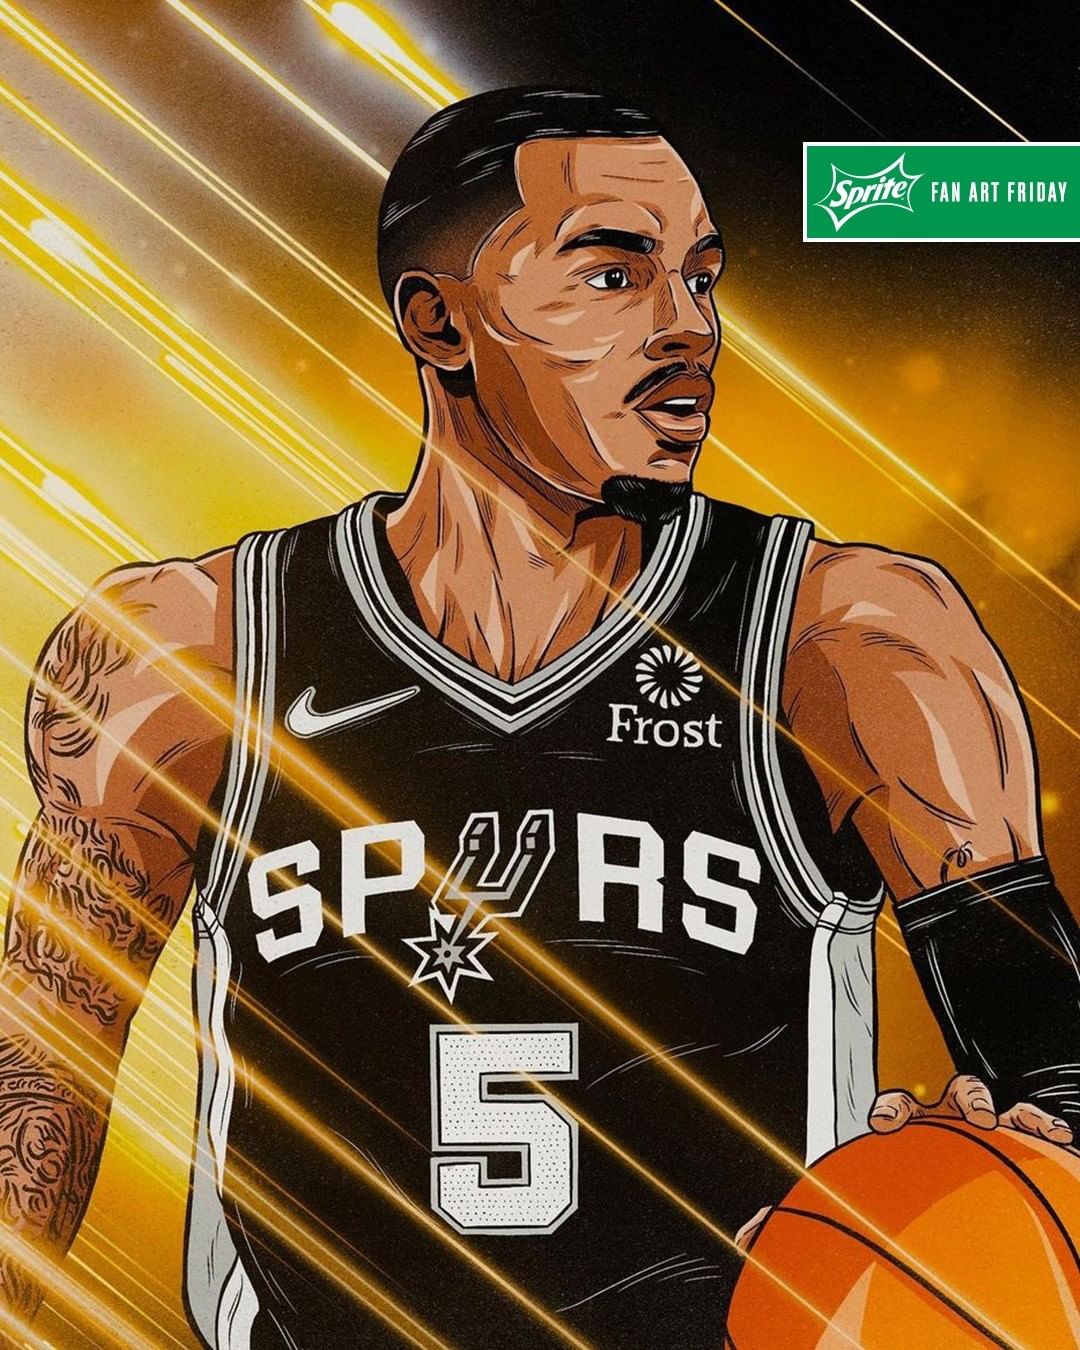 Getting the weekend started with some fresh #SpursFanArt  Keep submitting your ...